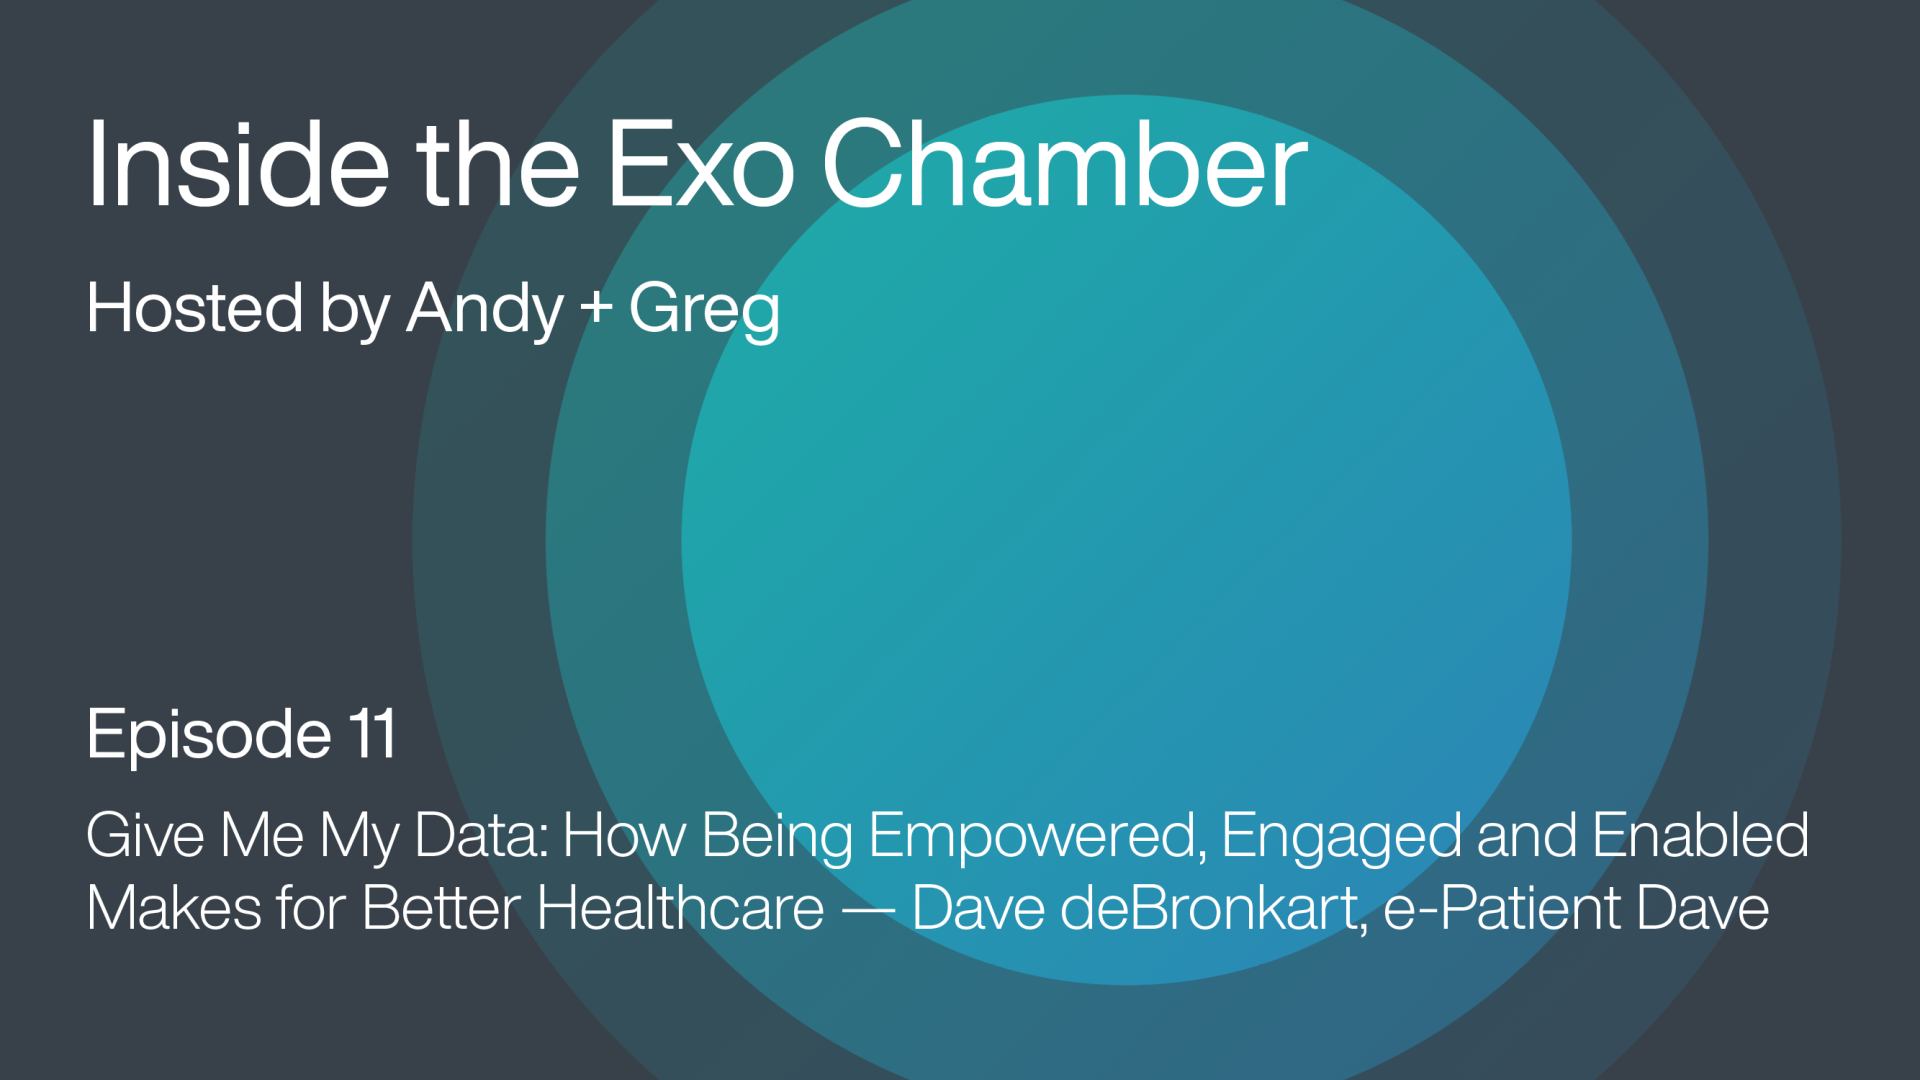 Episode 11: Give Me My Data: How Being Empowered, Engaged and Enabled Makes for Better Healthcare – Dave deBronkart